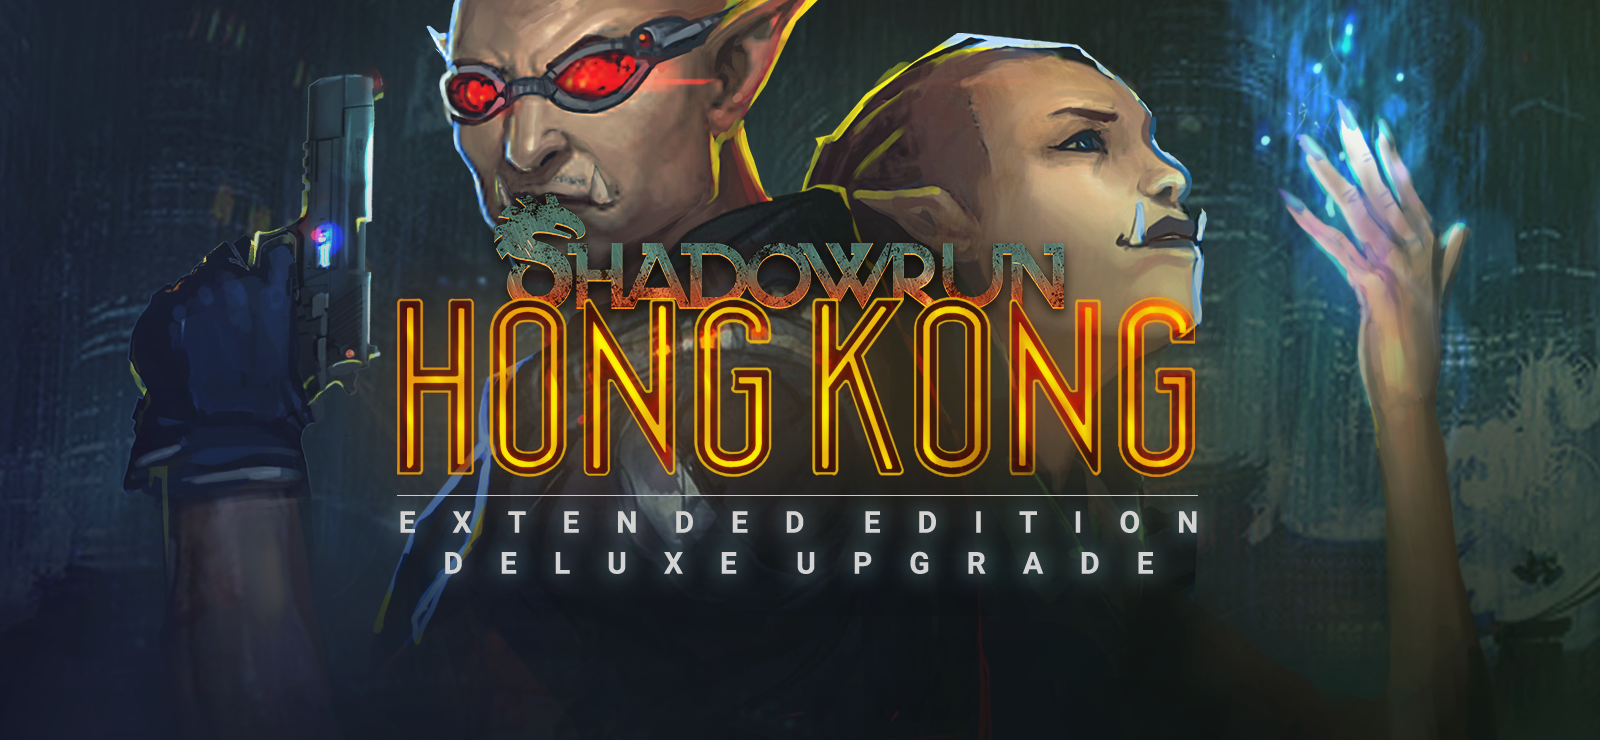 Shadowrun Hong Kong - Extended Edition Deluxe Upgrade